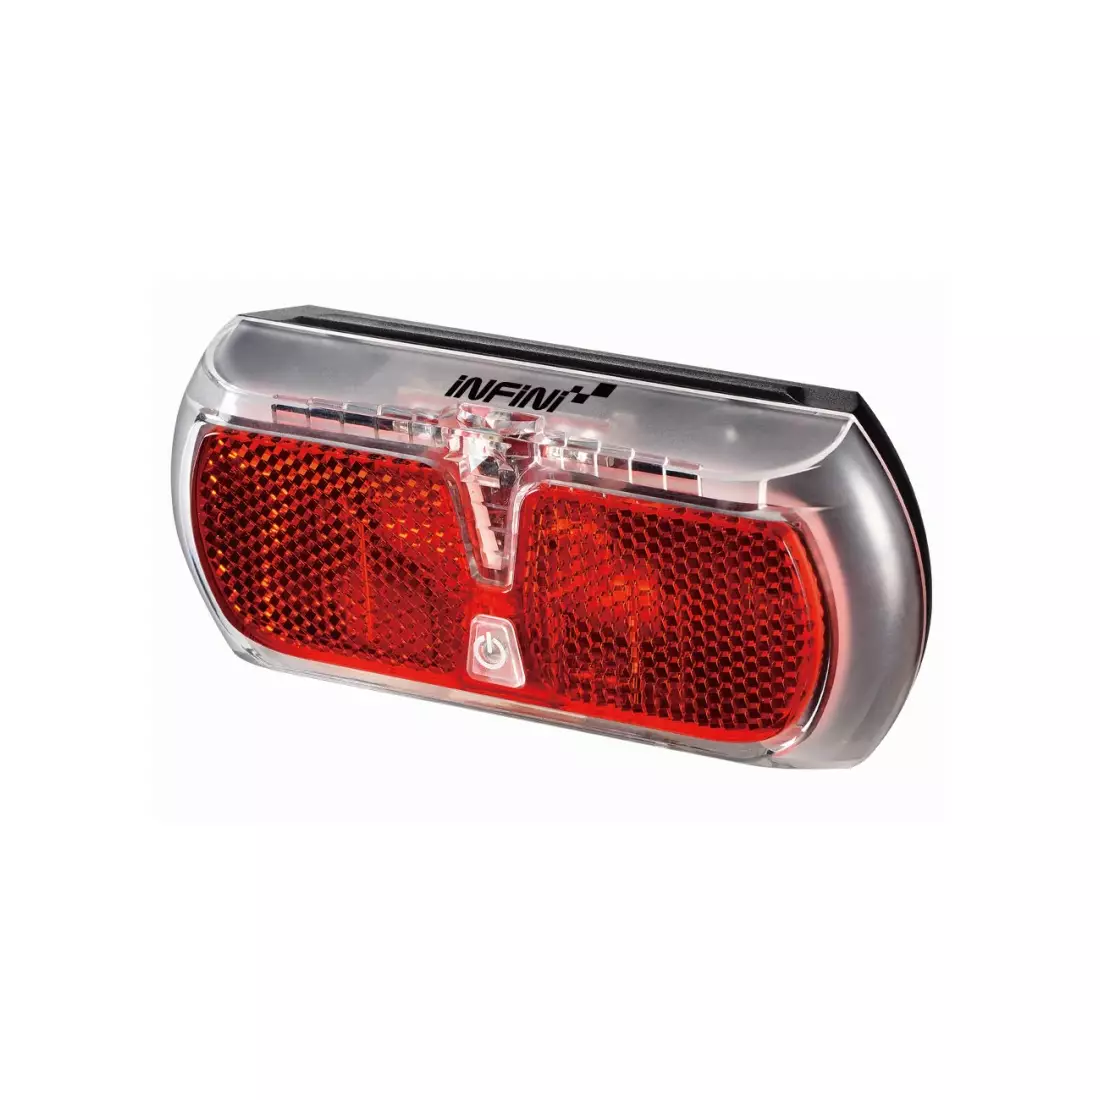 INFINI APOLLO 501 bicycle rear light for trunk I-501R2